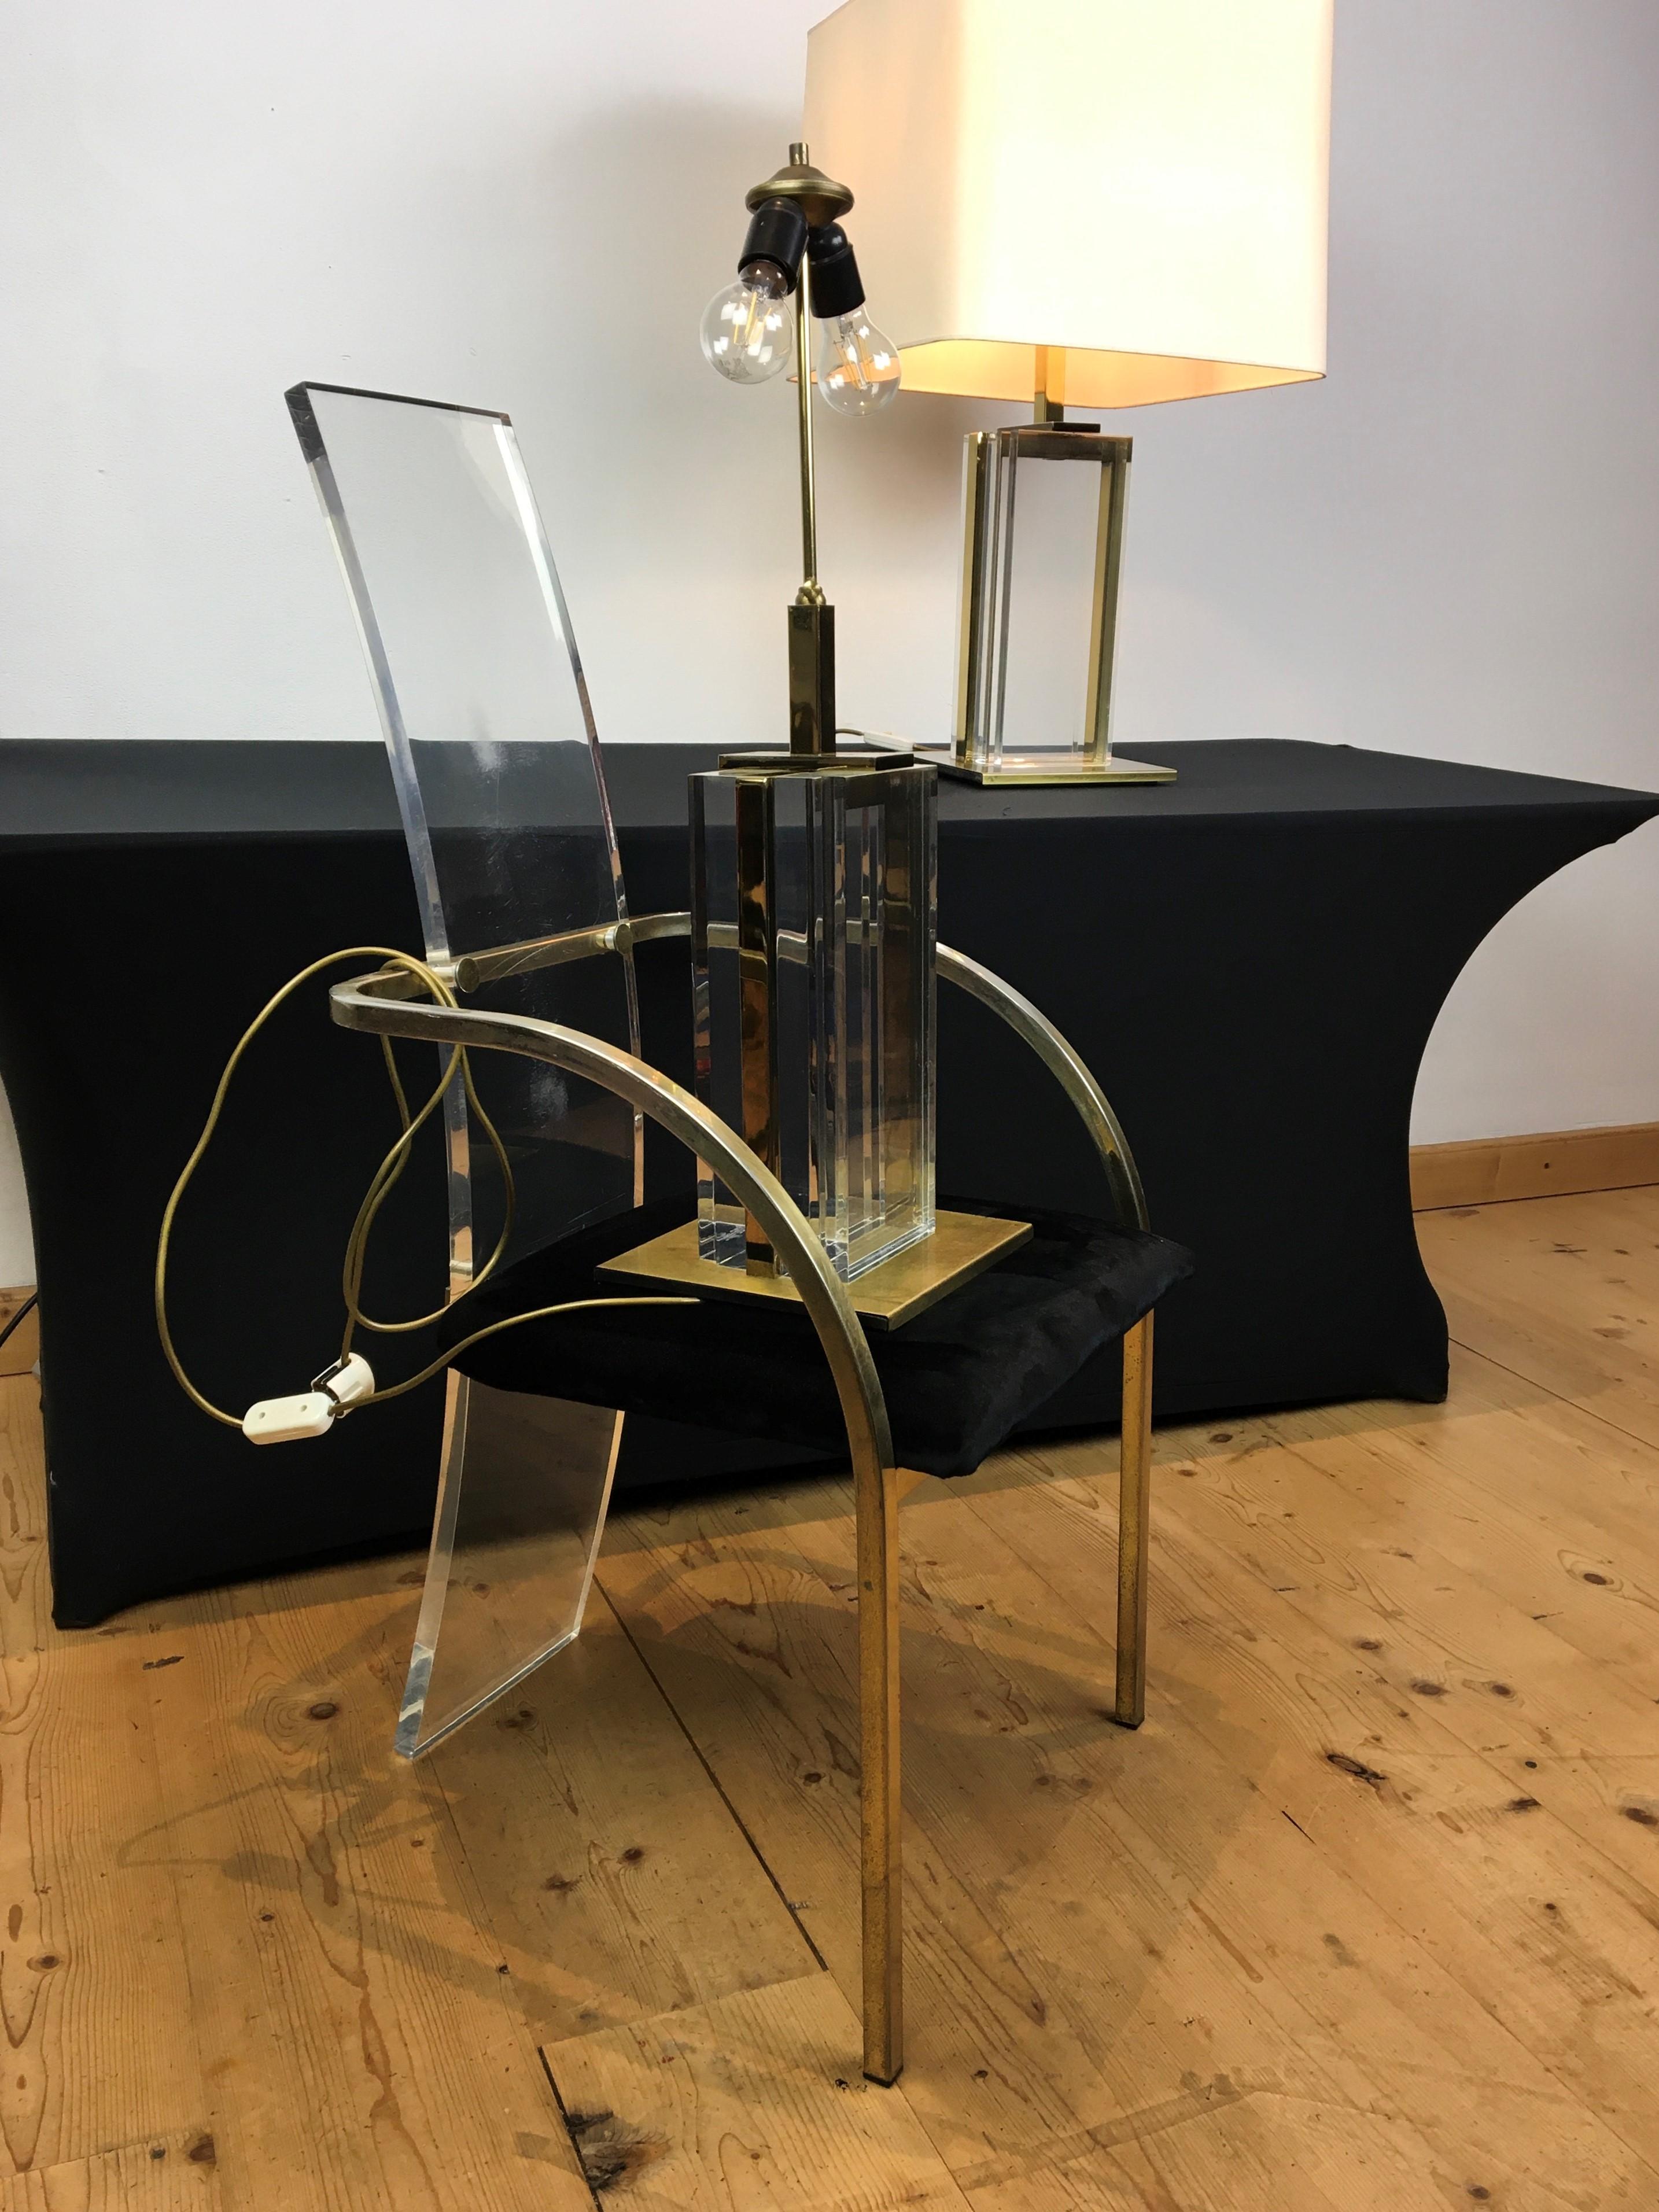 Pair of Belgo Chrome Table Lamps, Lucite and Brass, 1970s For Sale 14